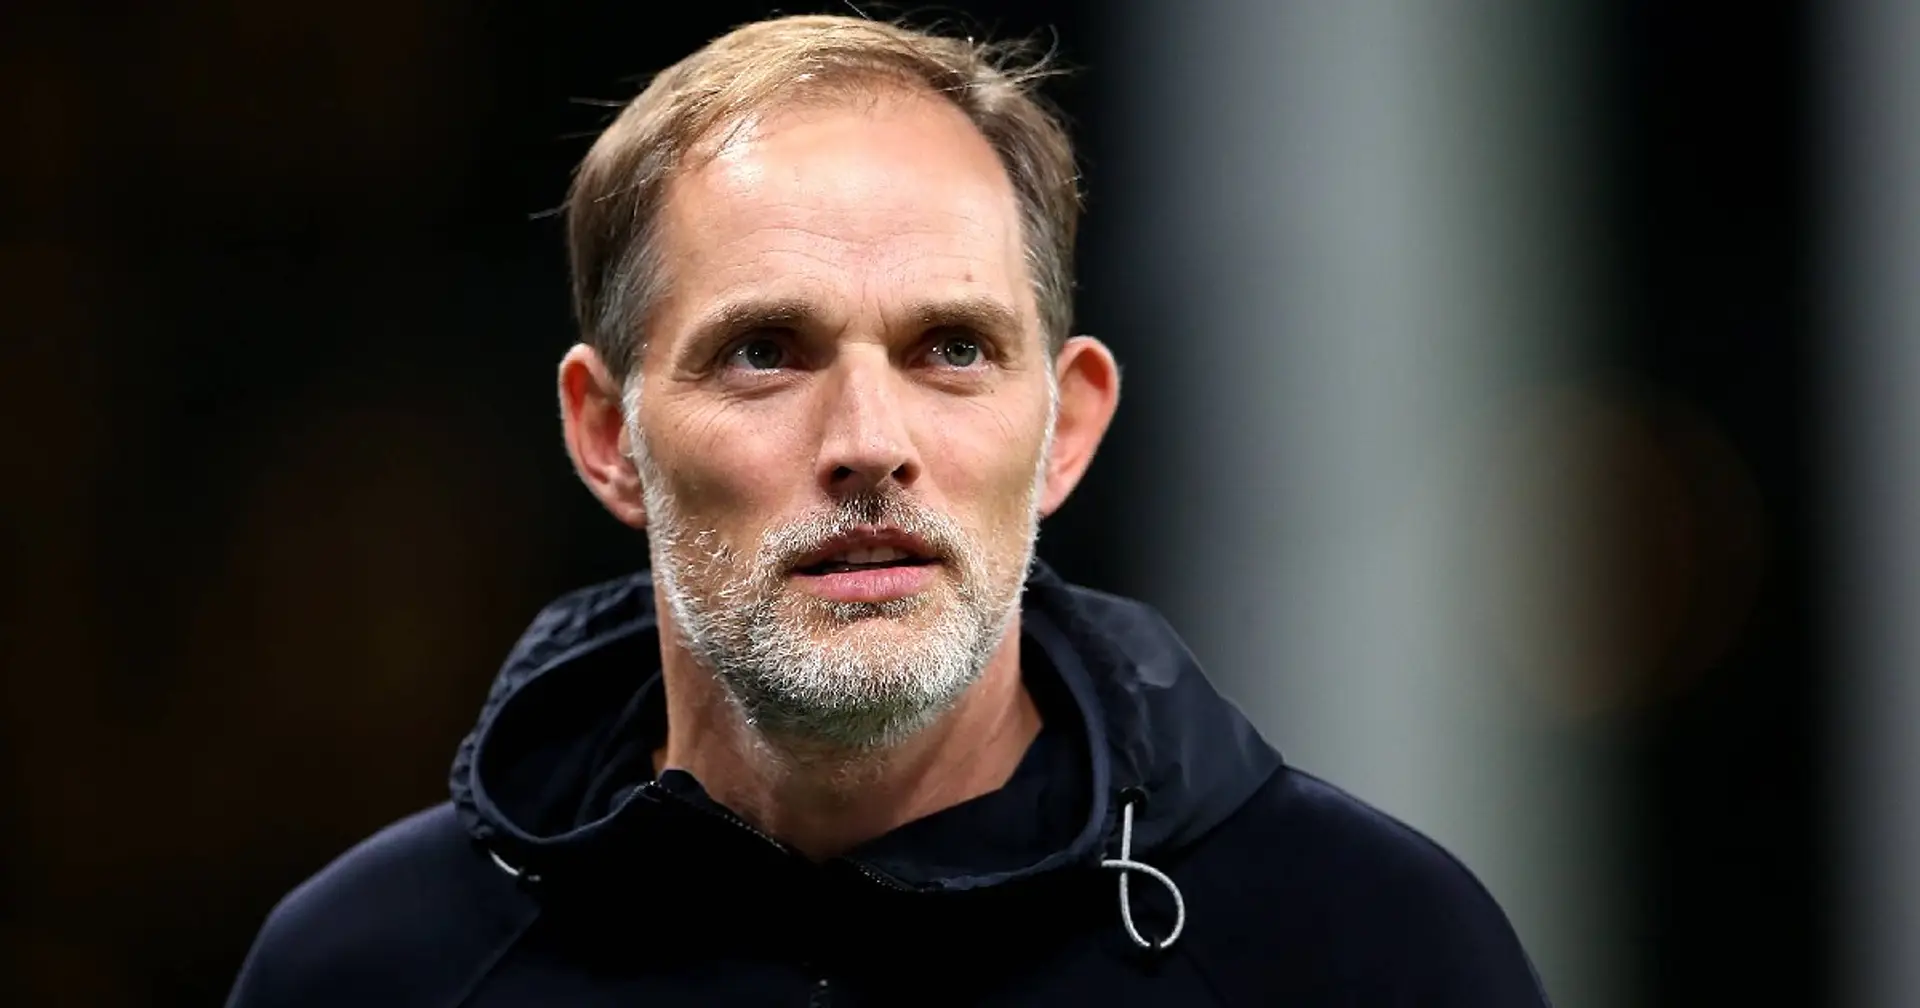 Would you take Tuchel back at Chelsea after Bayern sack? Why or why not?